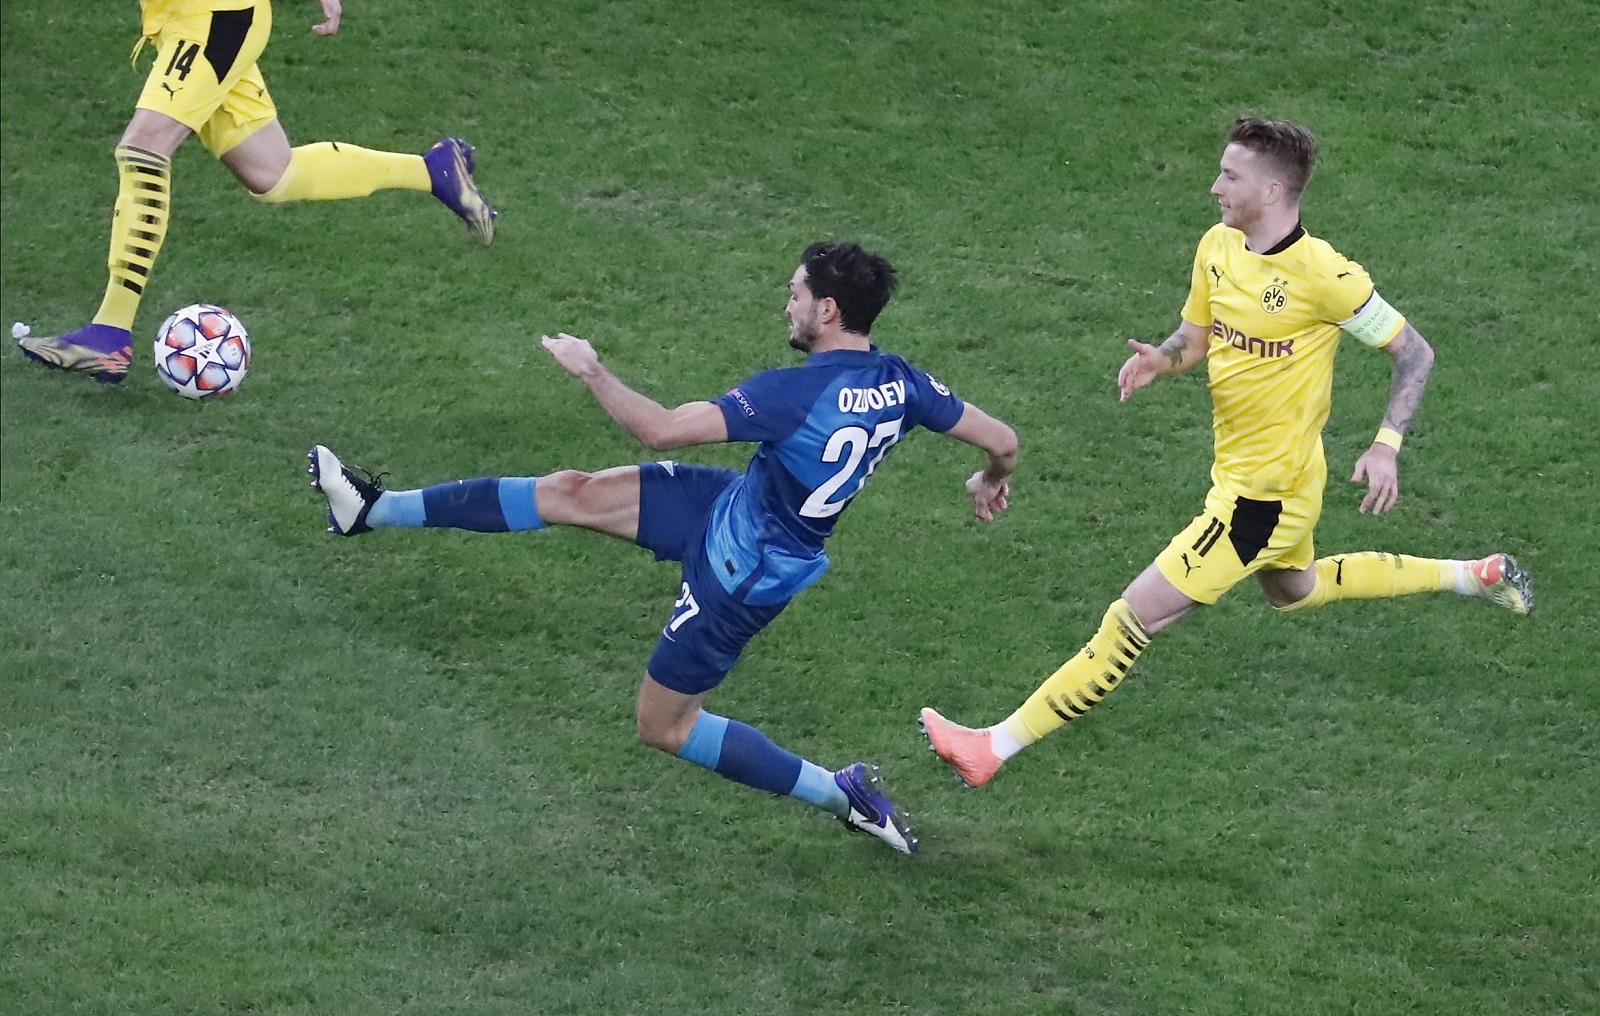 epa08870915 Zenit's Magomed Ozdoev (L) in action with Borussia Dortmund's Marco Reus (R) during the UEFA Champions League group F soccer match between Zenit St. Petersburg and Borussia Dortmund in St. Petersburg, Russia, 08 December 2020.  EPA/Anatoly Maltsev